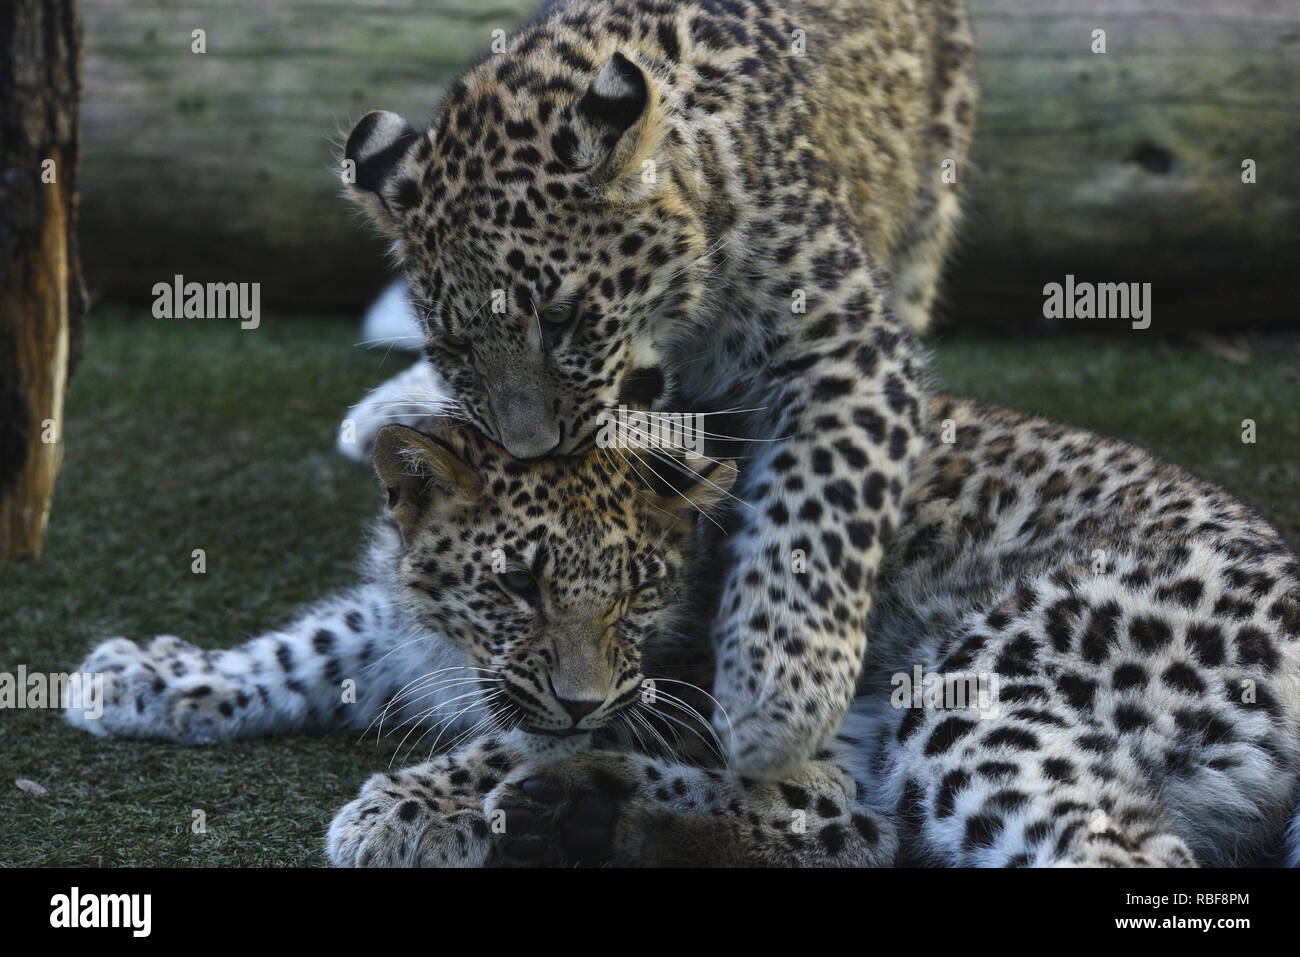 Madrid, Spain. 9th Jan, 2019. The babies Persian leopards seen playing in their enclosure at Madrid zoo. They were born on last April, 2018, after of 3 months of gestation, weighing about 0.5 kilograms. Credit: John Milner/SOPA Images/ZUMA Wire/Alamy Live News Stock Photo